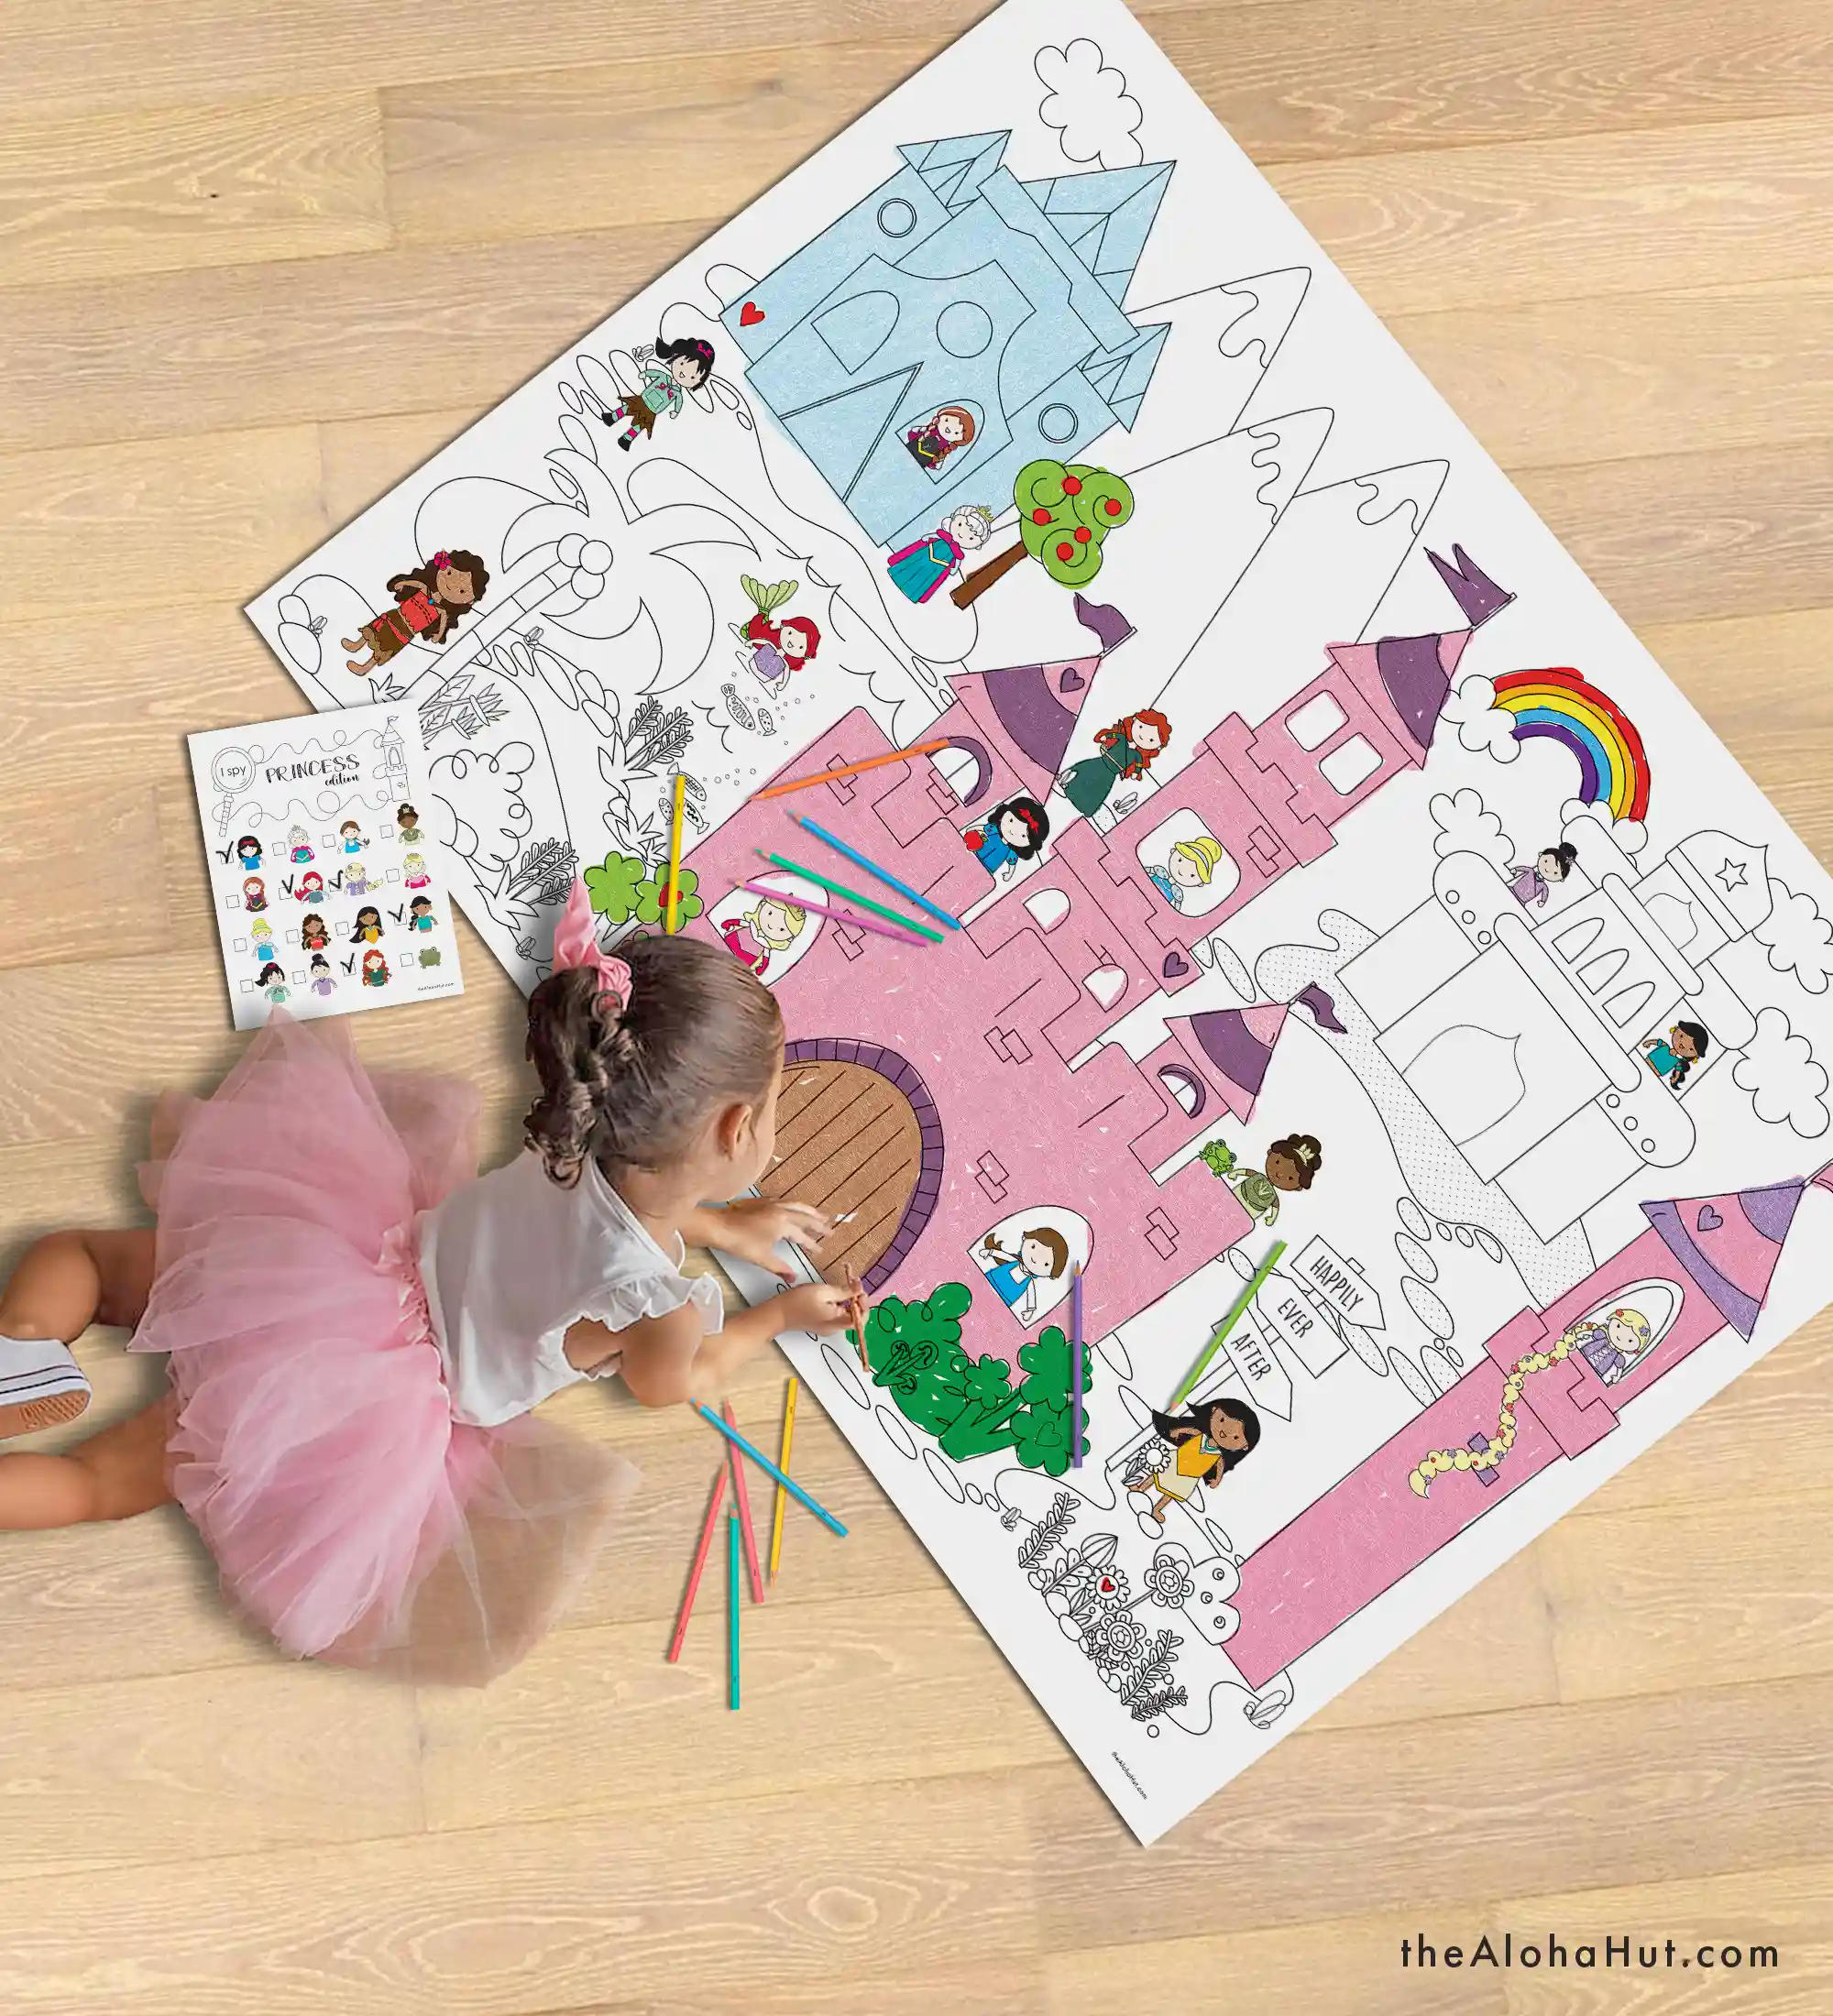 Disney Princess Party Ideas - Giant Coloring Poster - 2